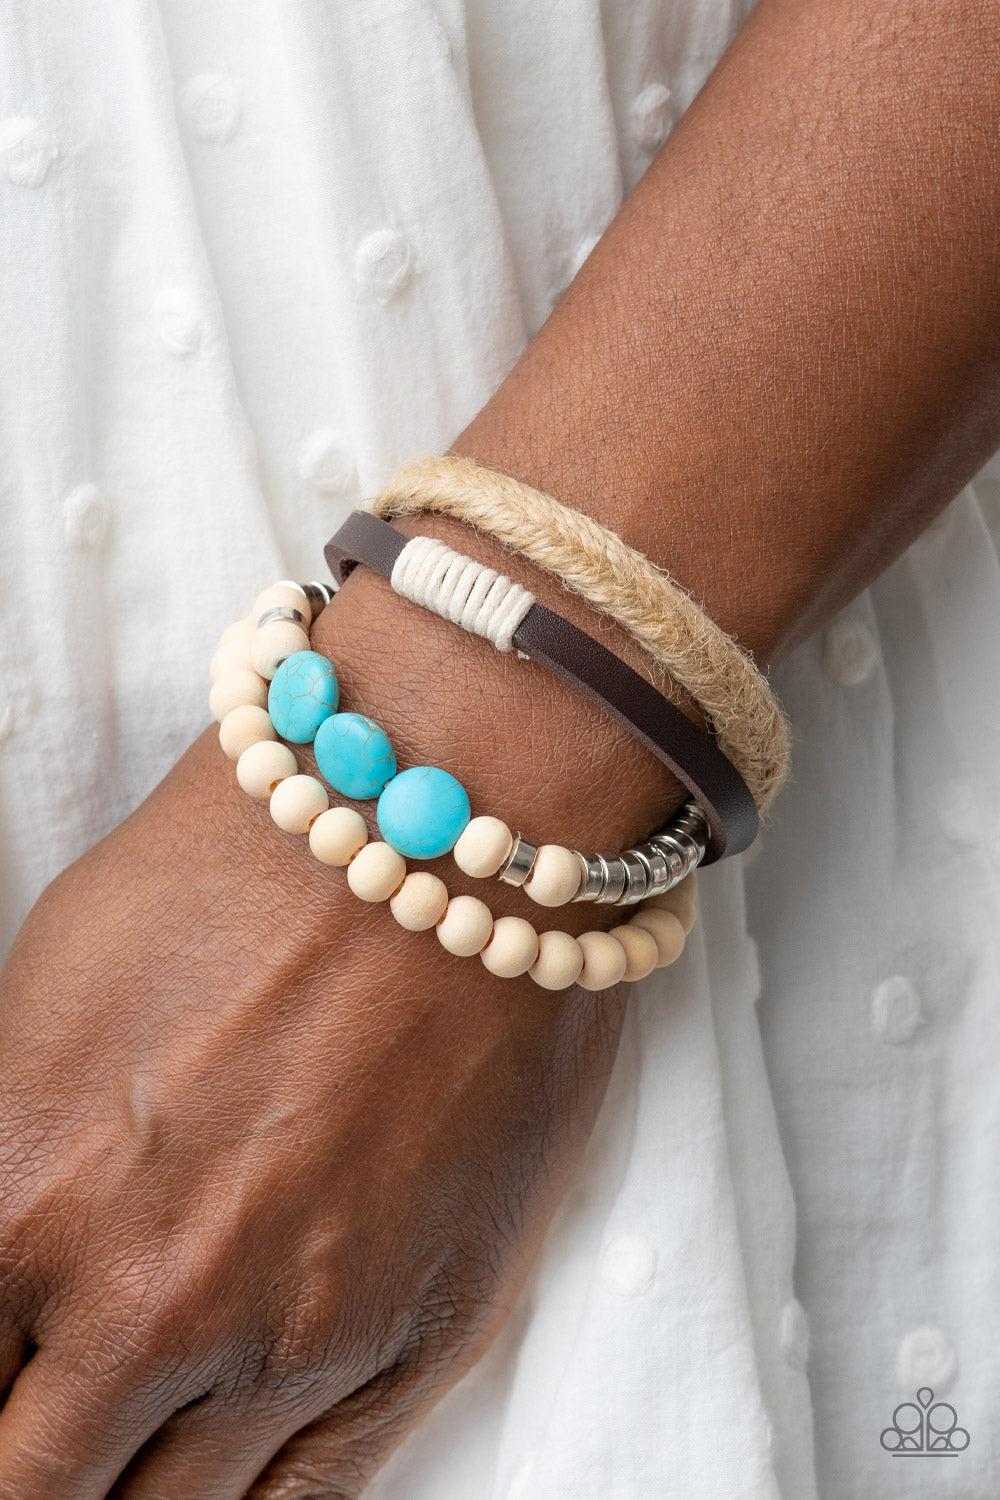 DRIFTER Away Turquoise Blue Stone &amp; White Wood Urban Bracelet - Paparazzi Accessories-on model - CarasShop.com - $5 Jewelry by Cara Jewels